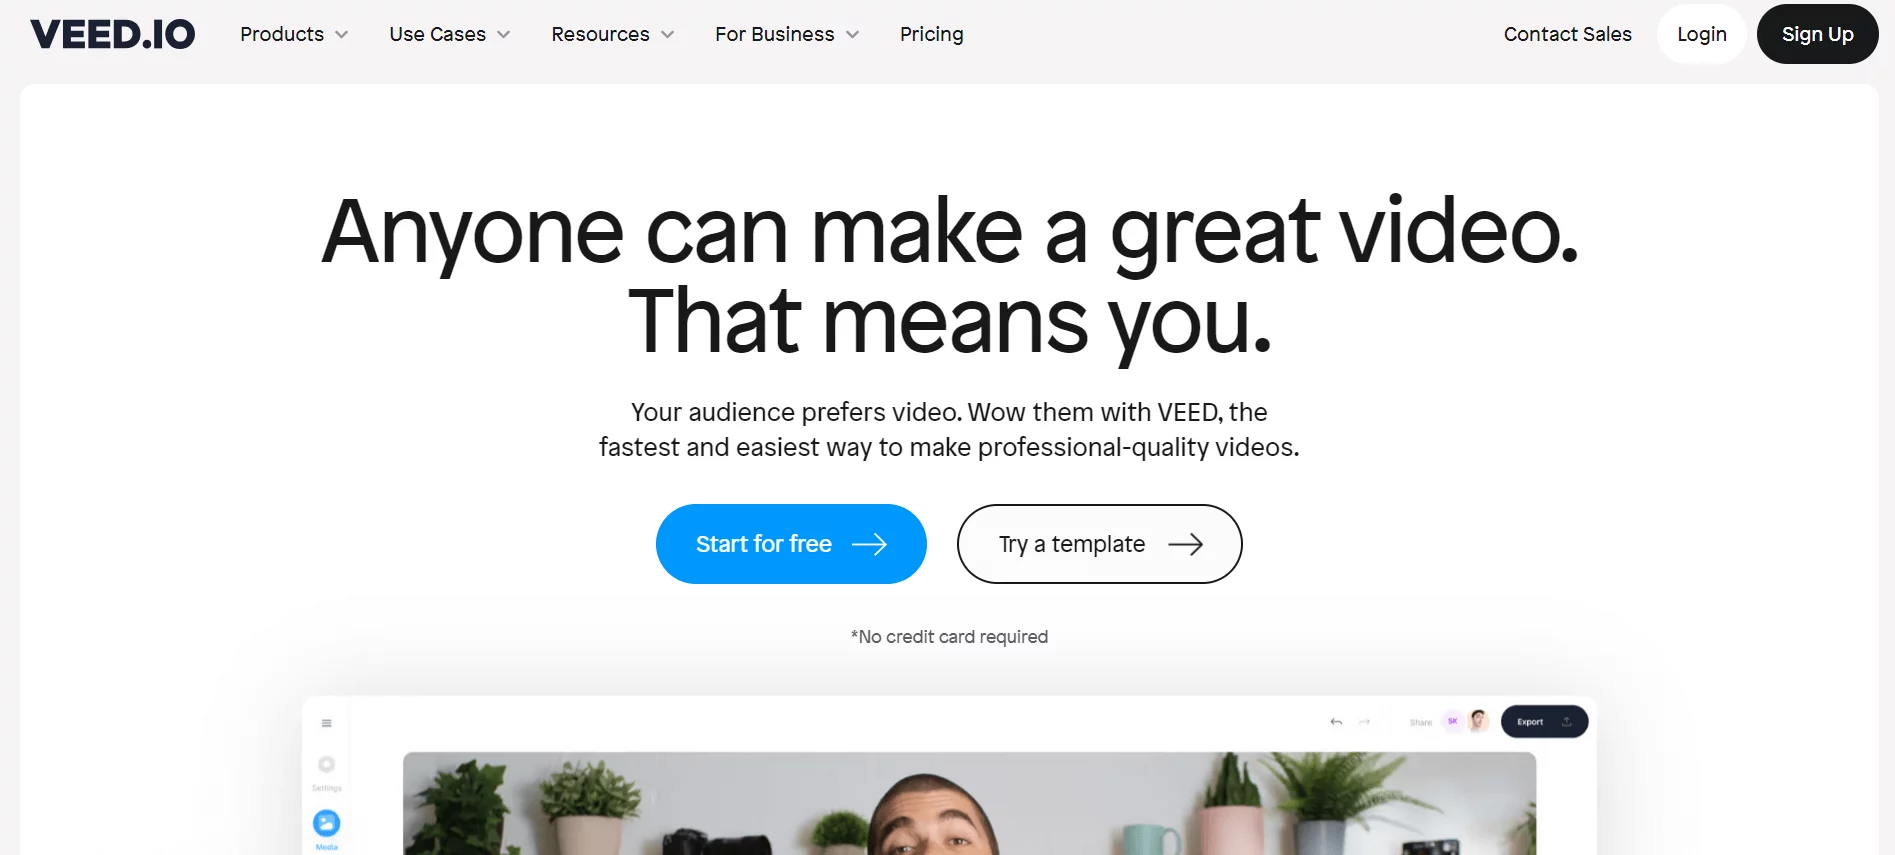 VEED.IO website homepage promoting a user-friendly video creation tool with a headline and call-to-action buttons for starting for free or trying a template.